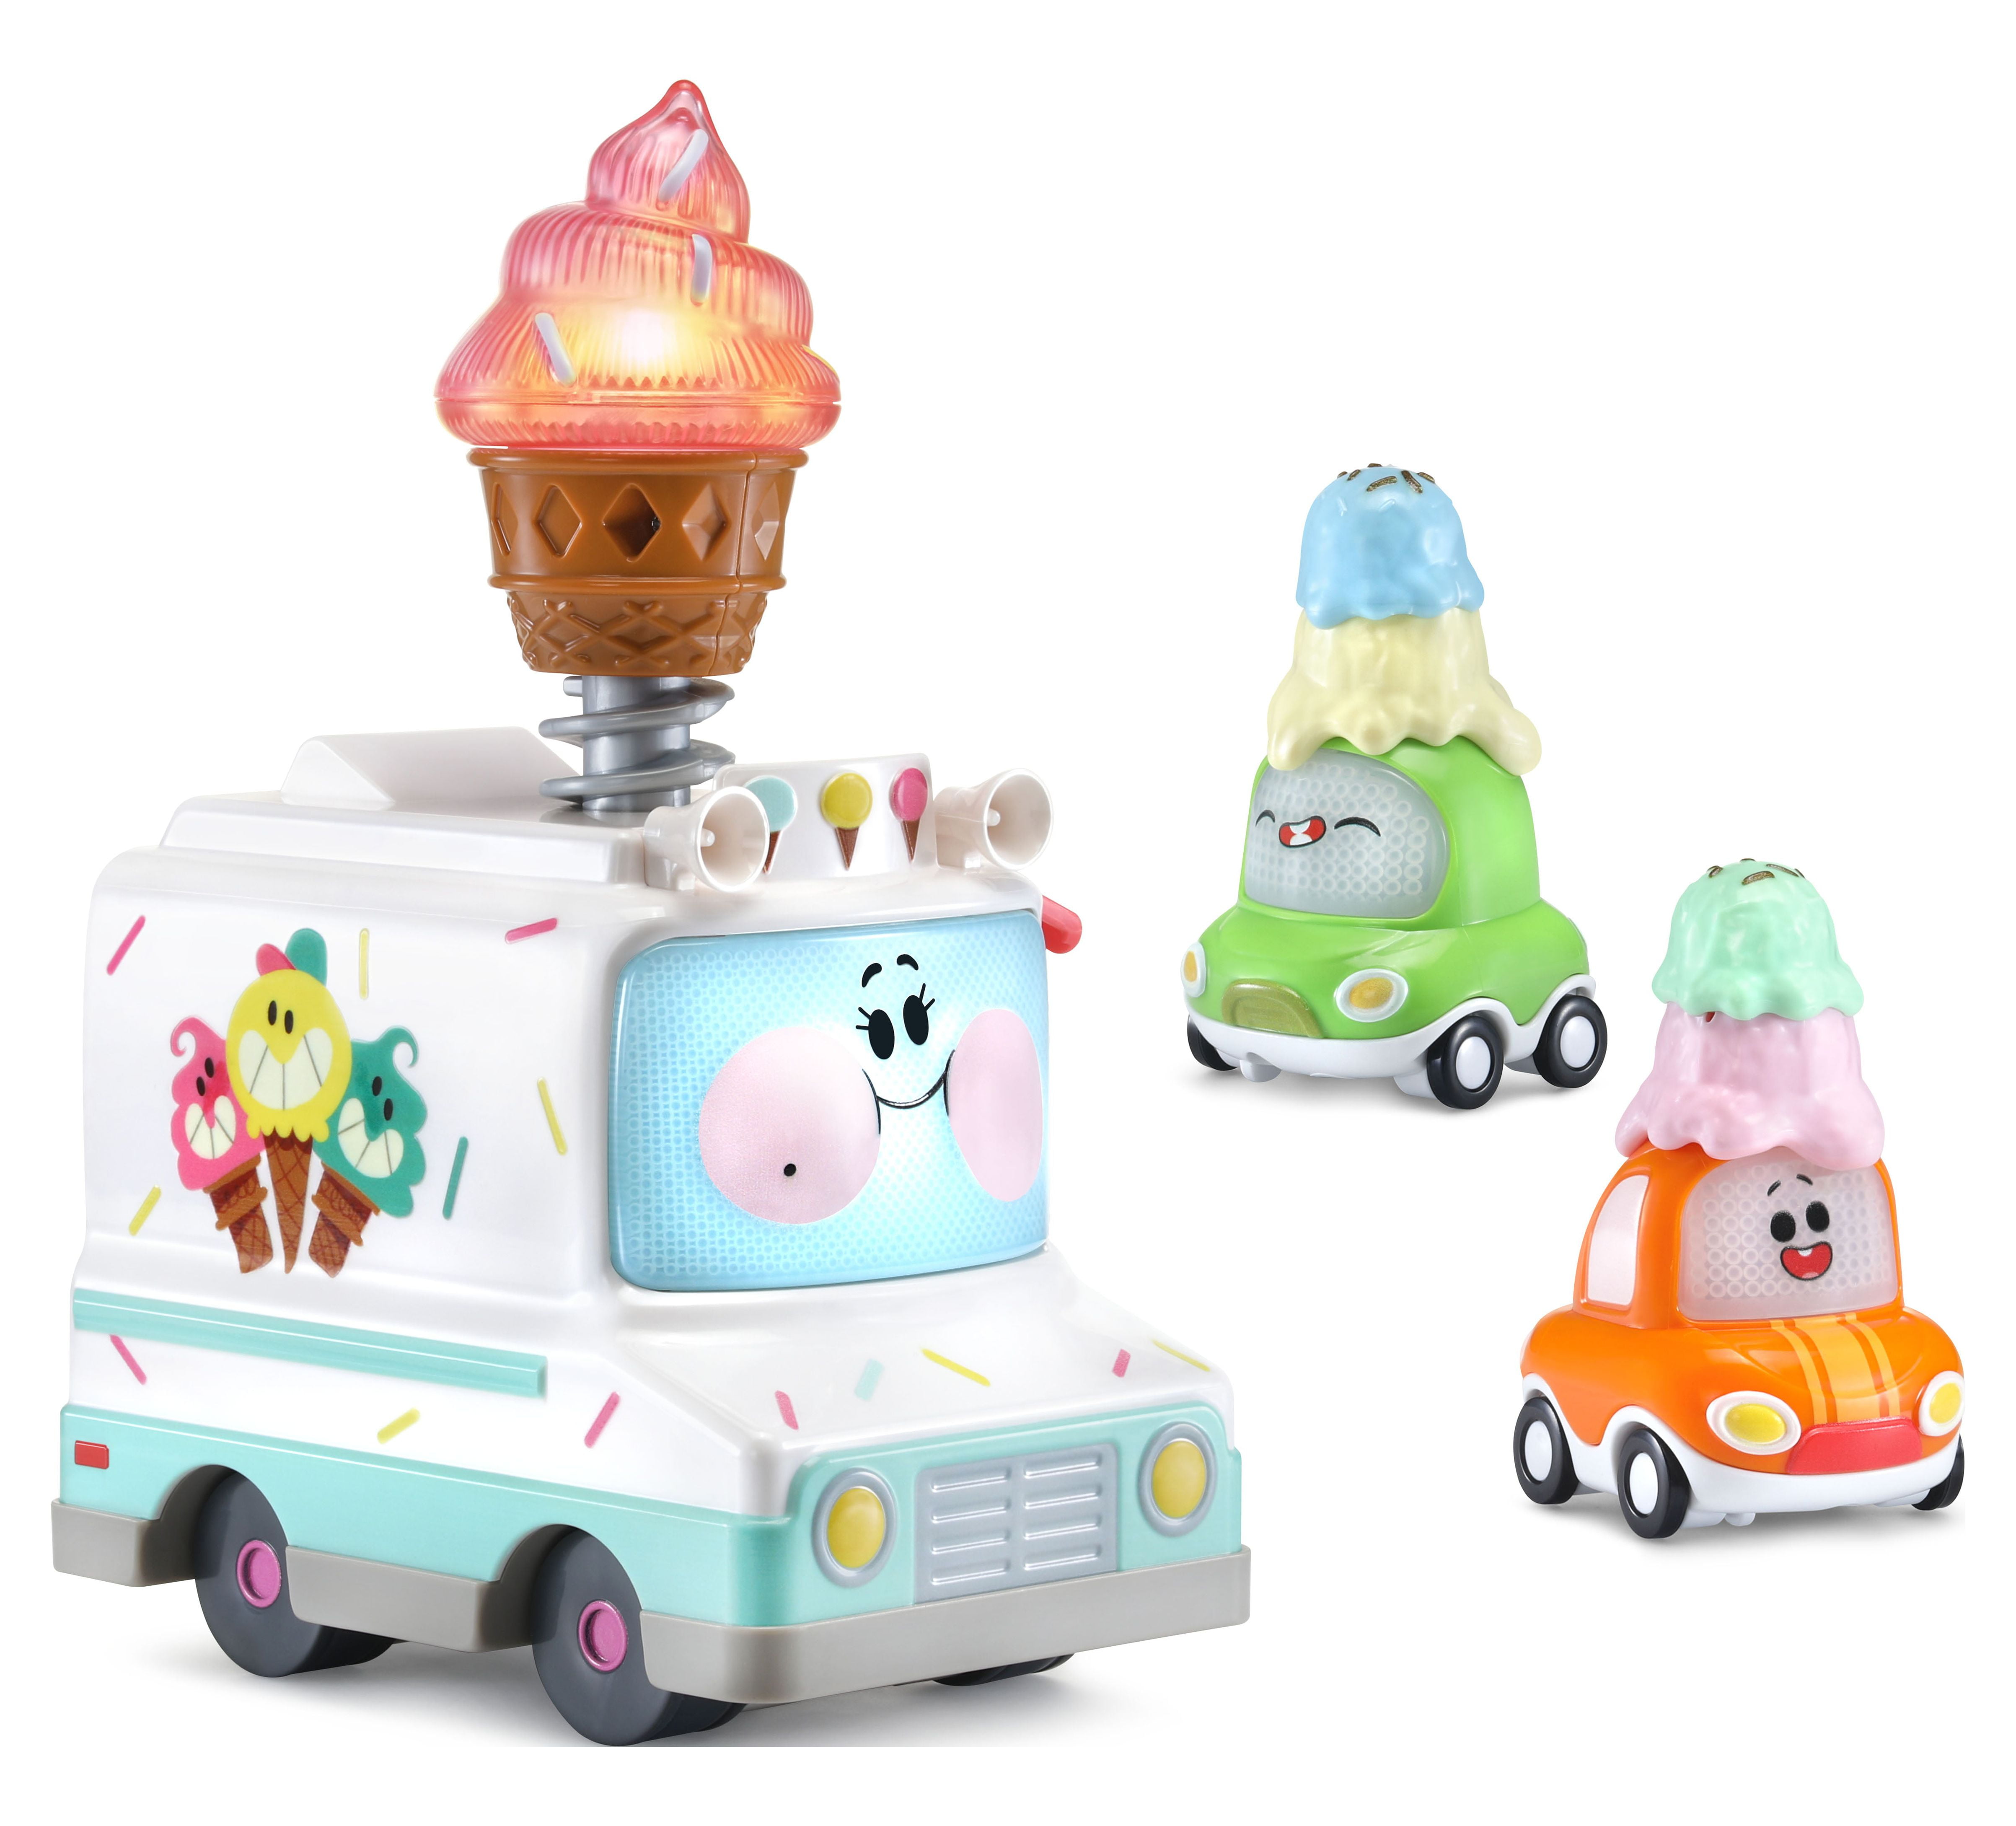 Carson® Truck™ Go! Ice Scoops Cory Go! VTech® Two Cream Eileen